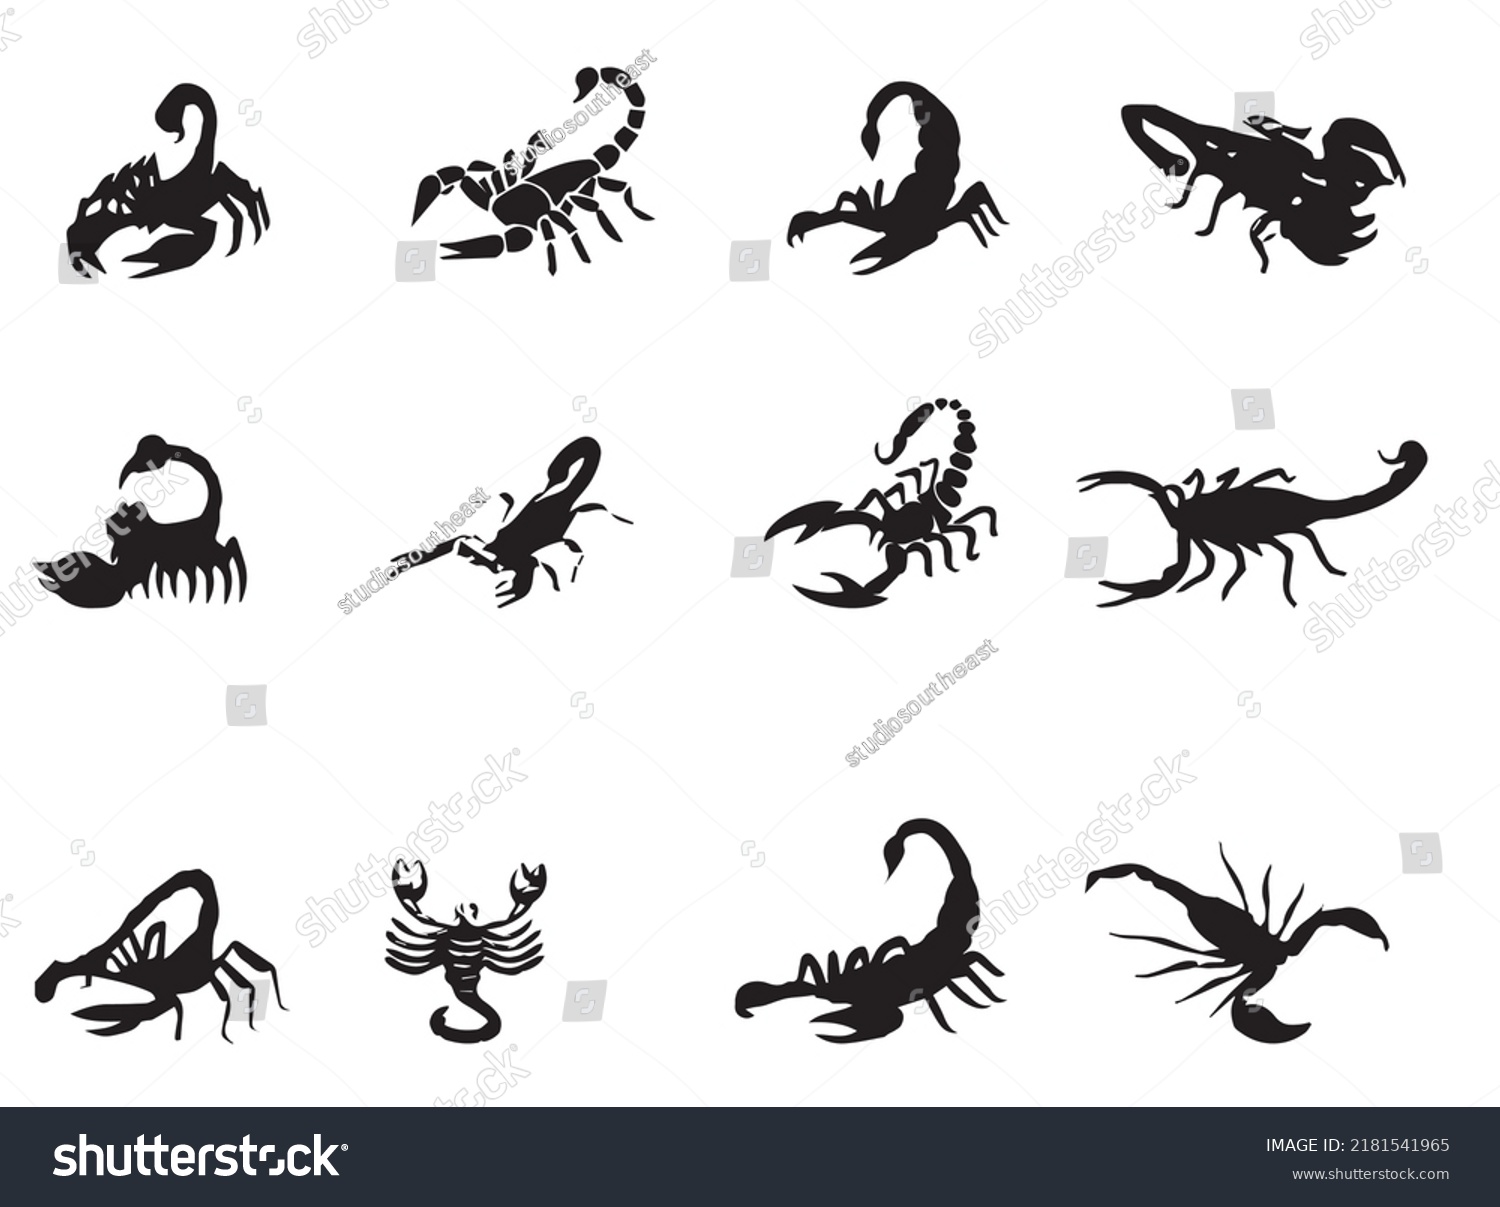 SVG of Scorpion Silhouette Vector Stock Illustration. Scorpion Image. Scorpion picture. Scorpion Vector Image svg